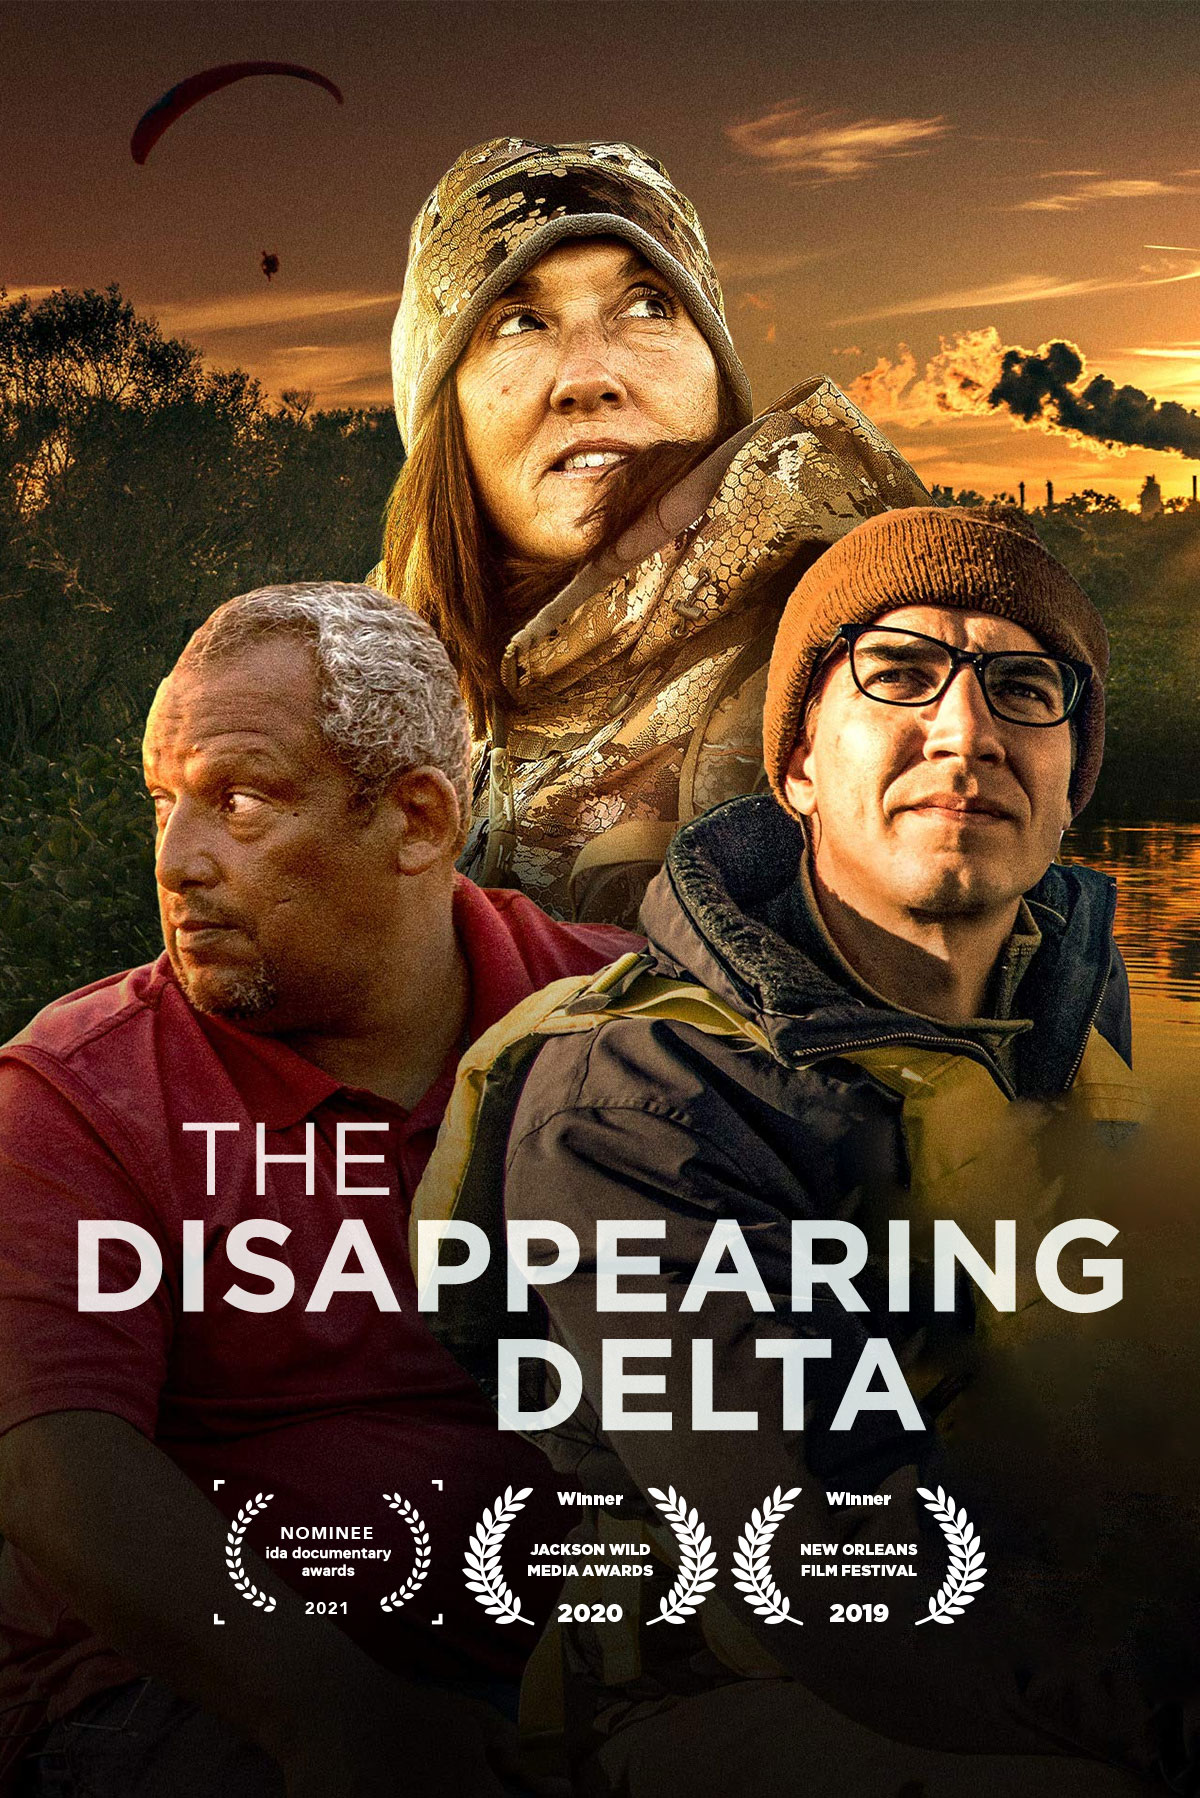 The Disappearing Delta